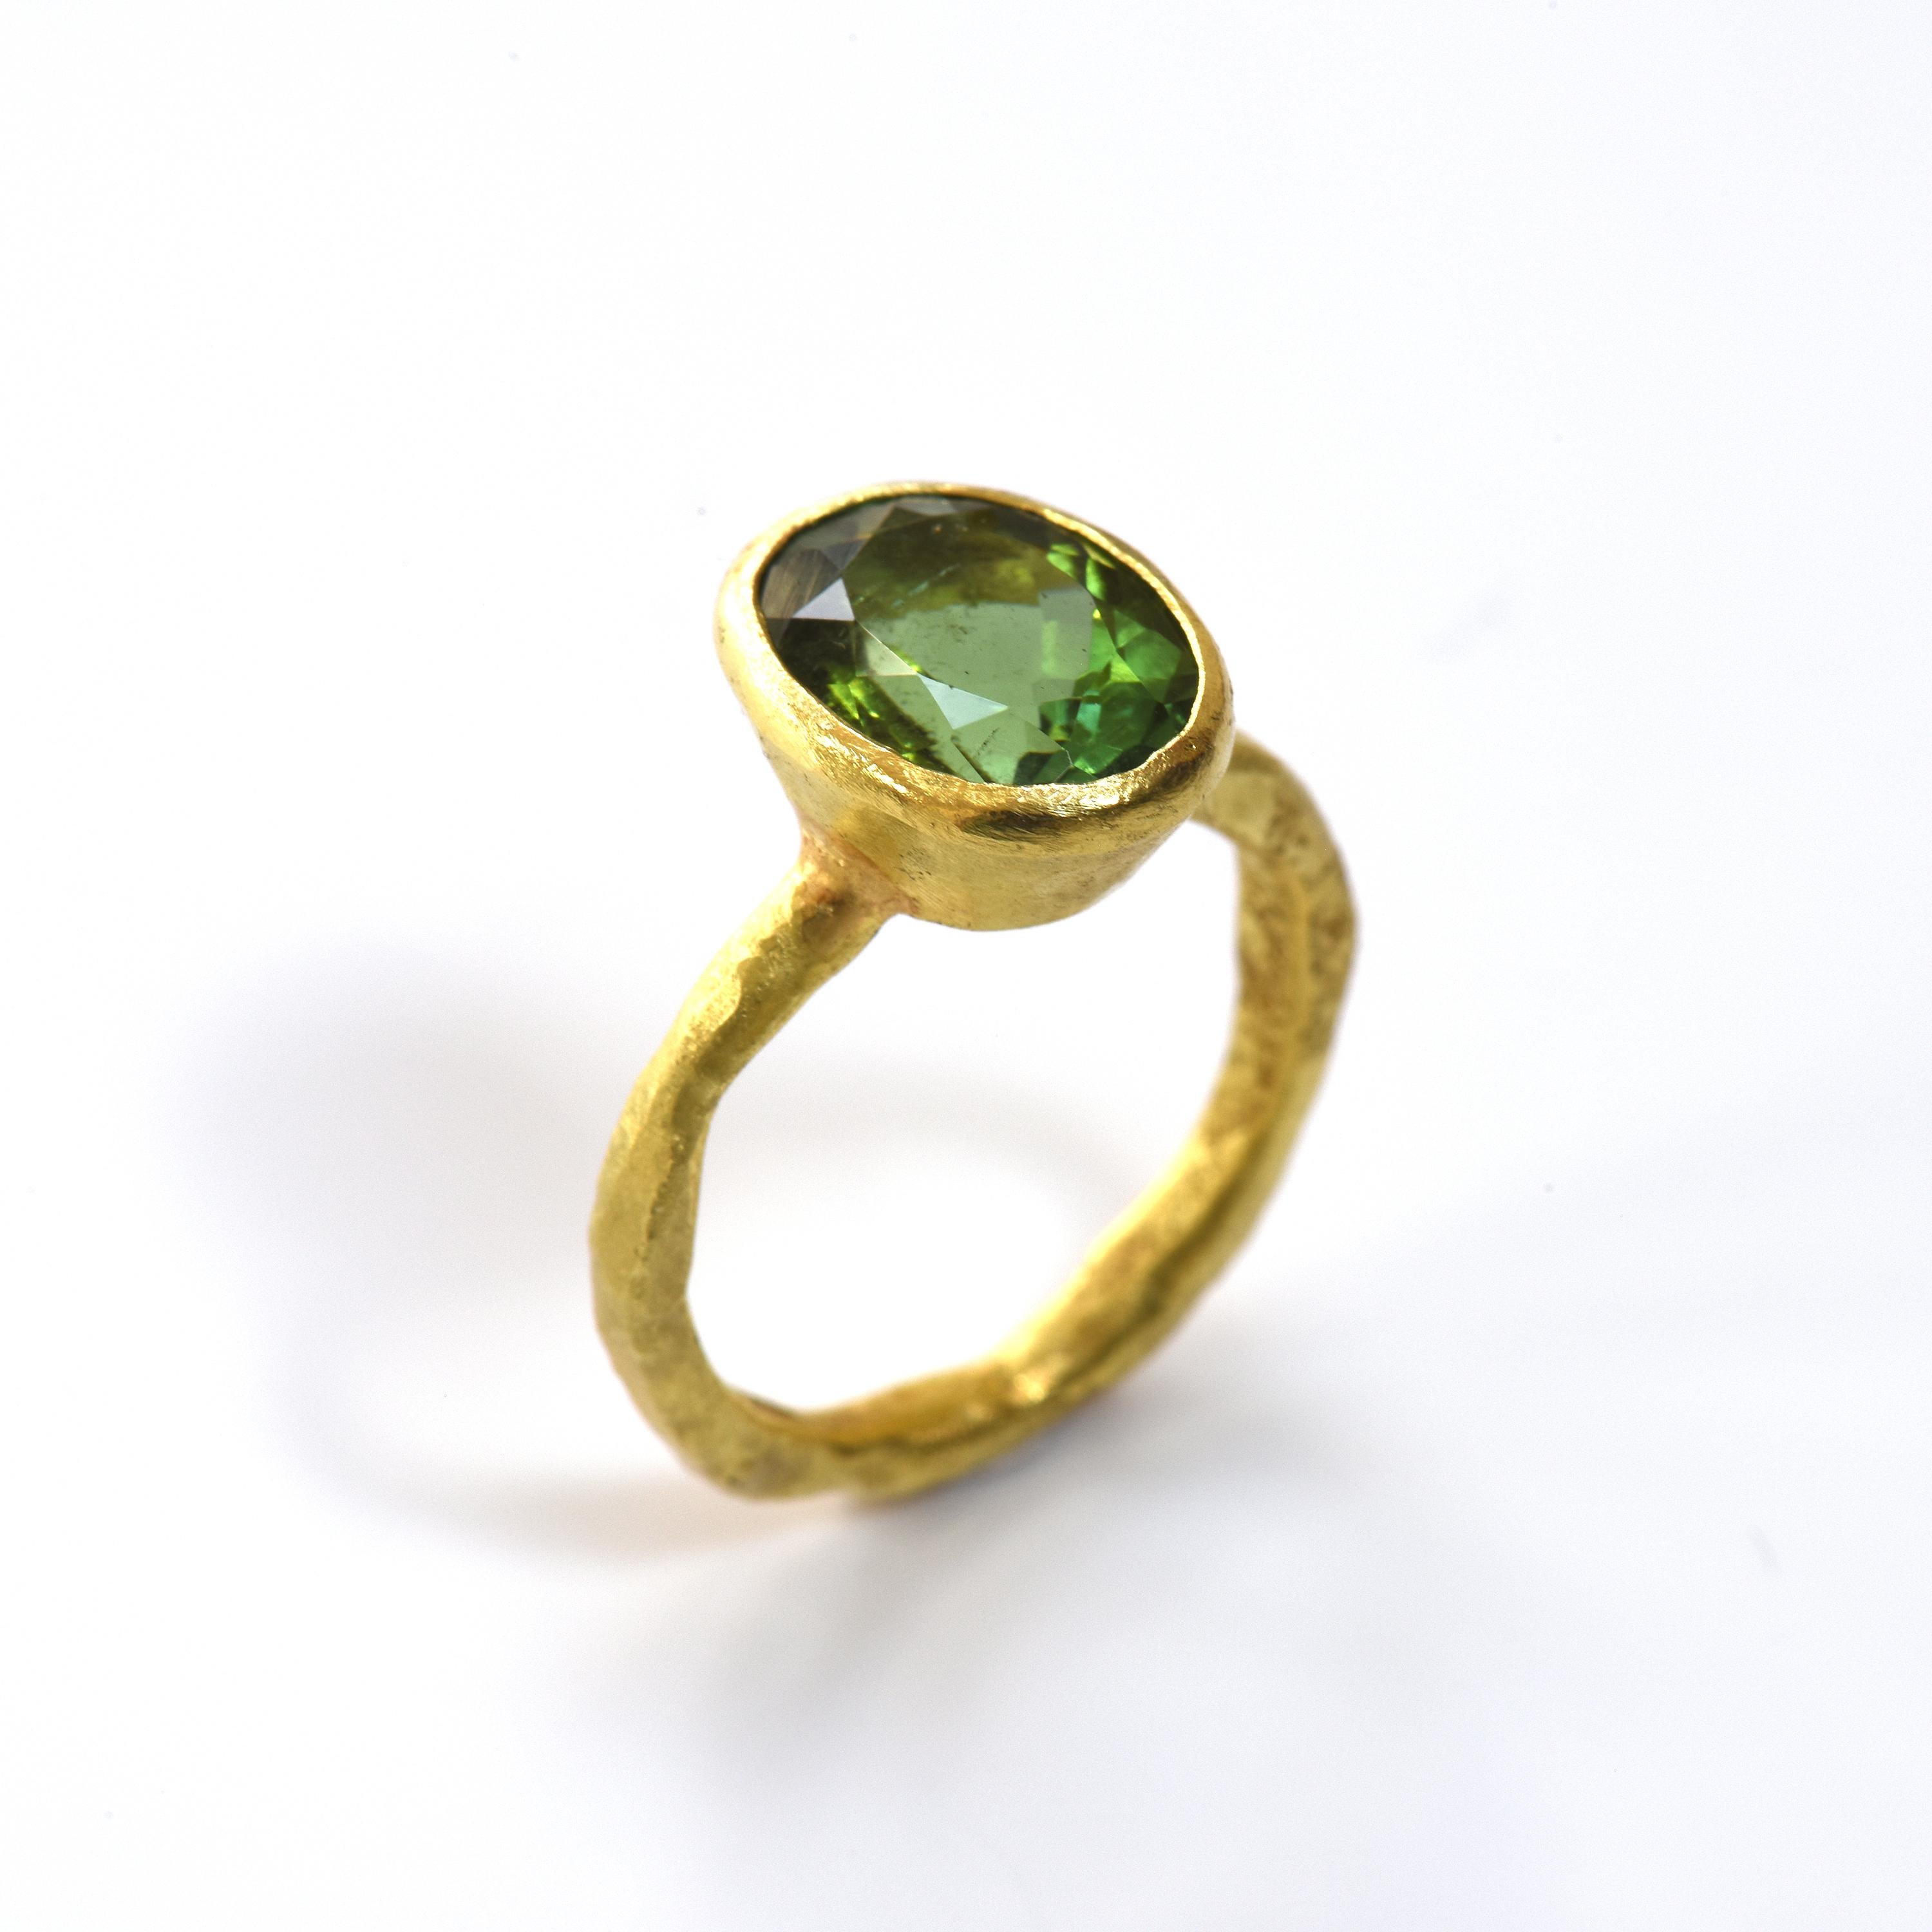 Oval bottle green tourmaline approximately 5 carats, set in an 18k yellow gold tapered rub over setting on 18k yellow gold organic textured band.

Disa Allsopp is an internationally renowned goldsmith based in London, UK. She is known for her use of